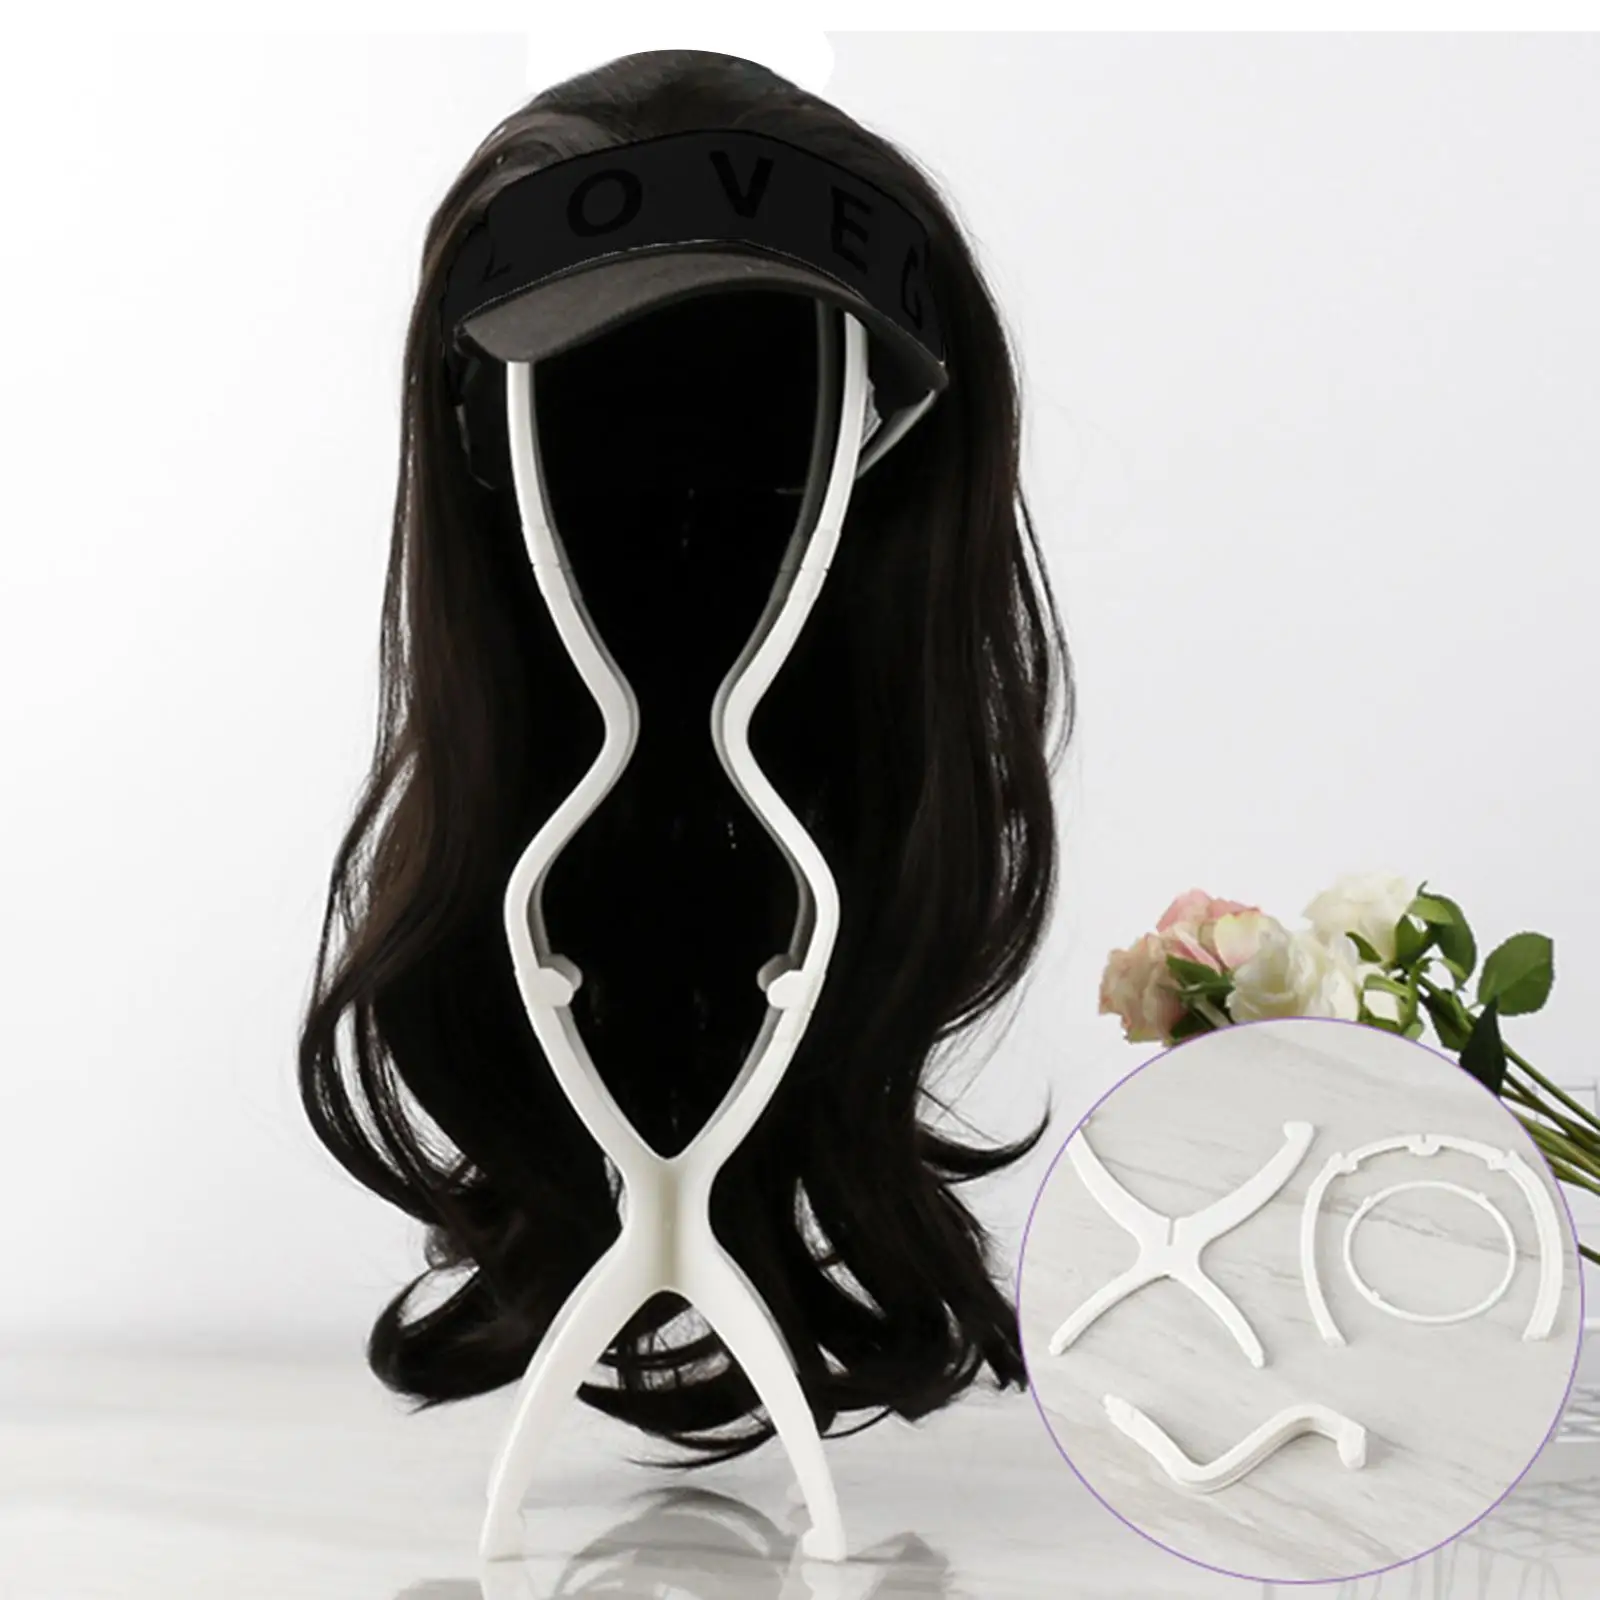 2x Wig Stand Foldable Hats Modern Wigs Hanger Tabletop for Salon Travel Hairdresser